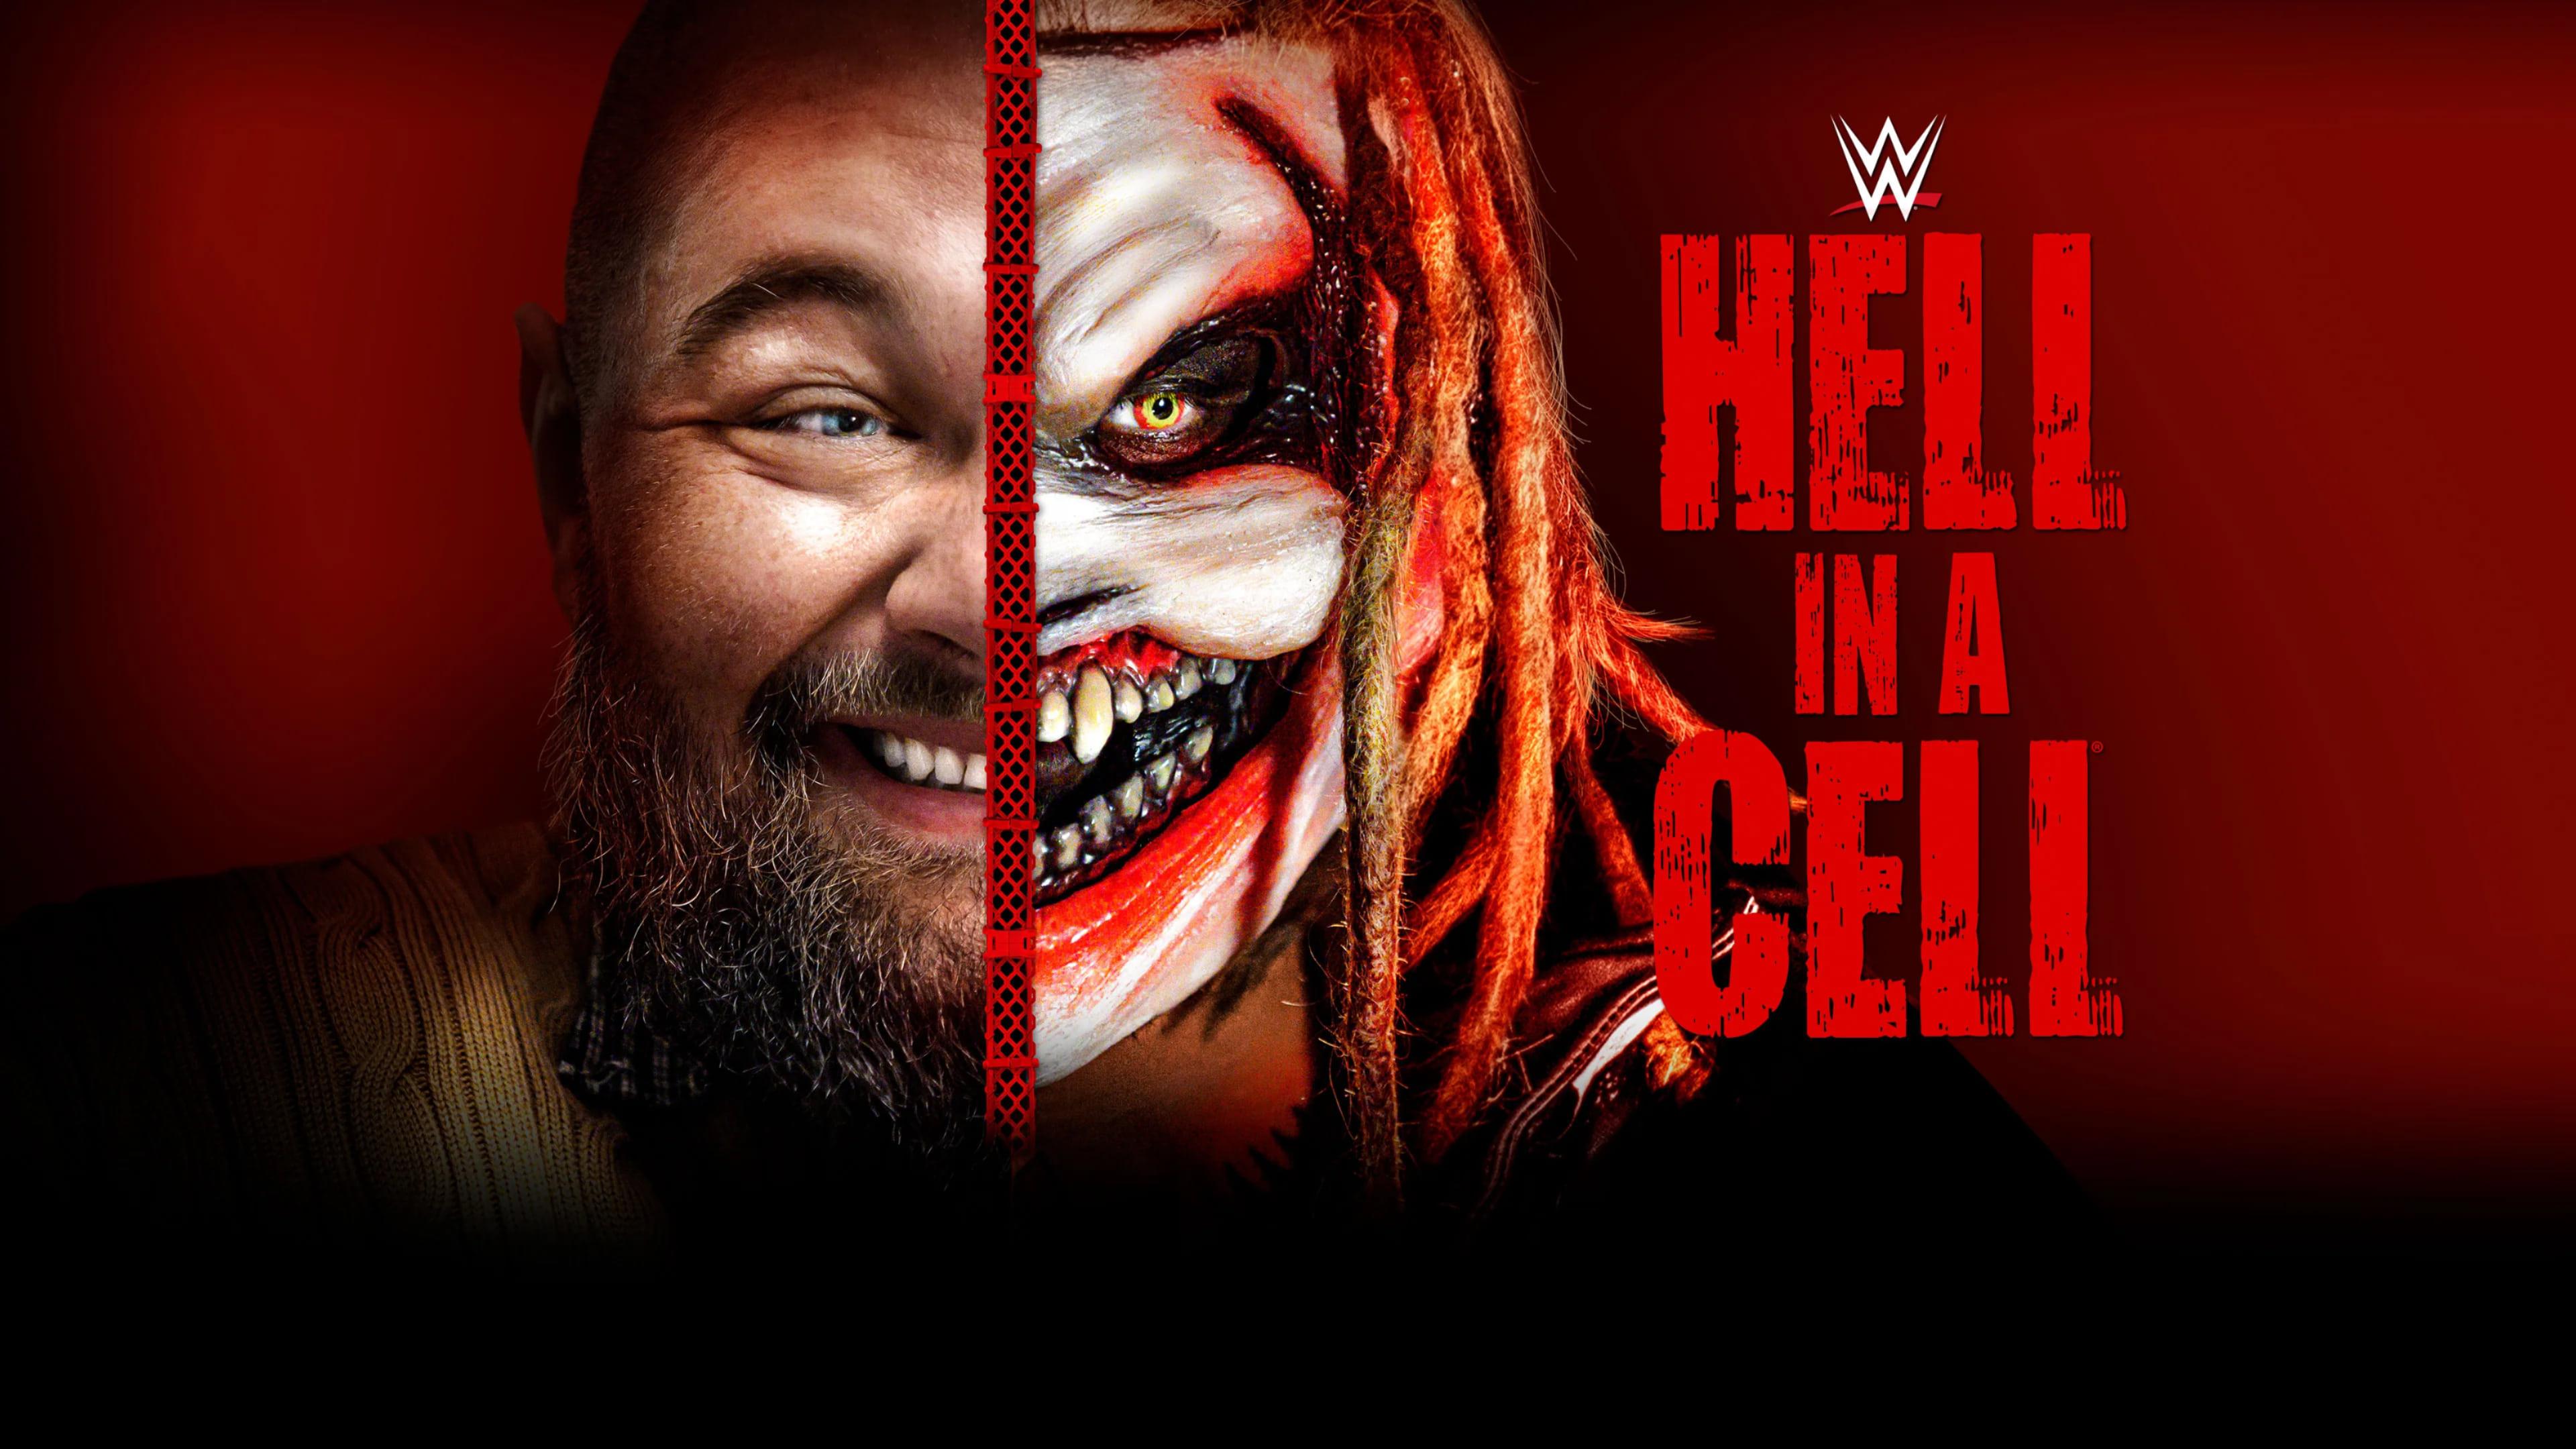 WWE Hell in a Cell 2019 backdrop